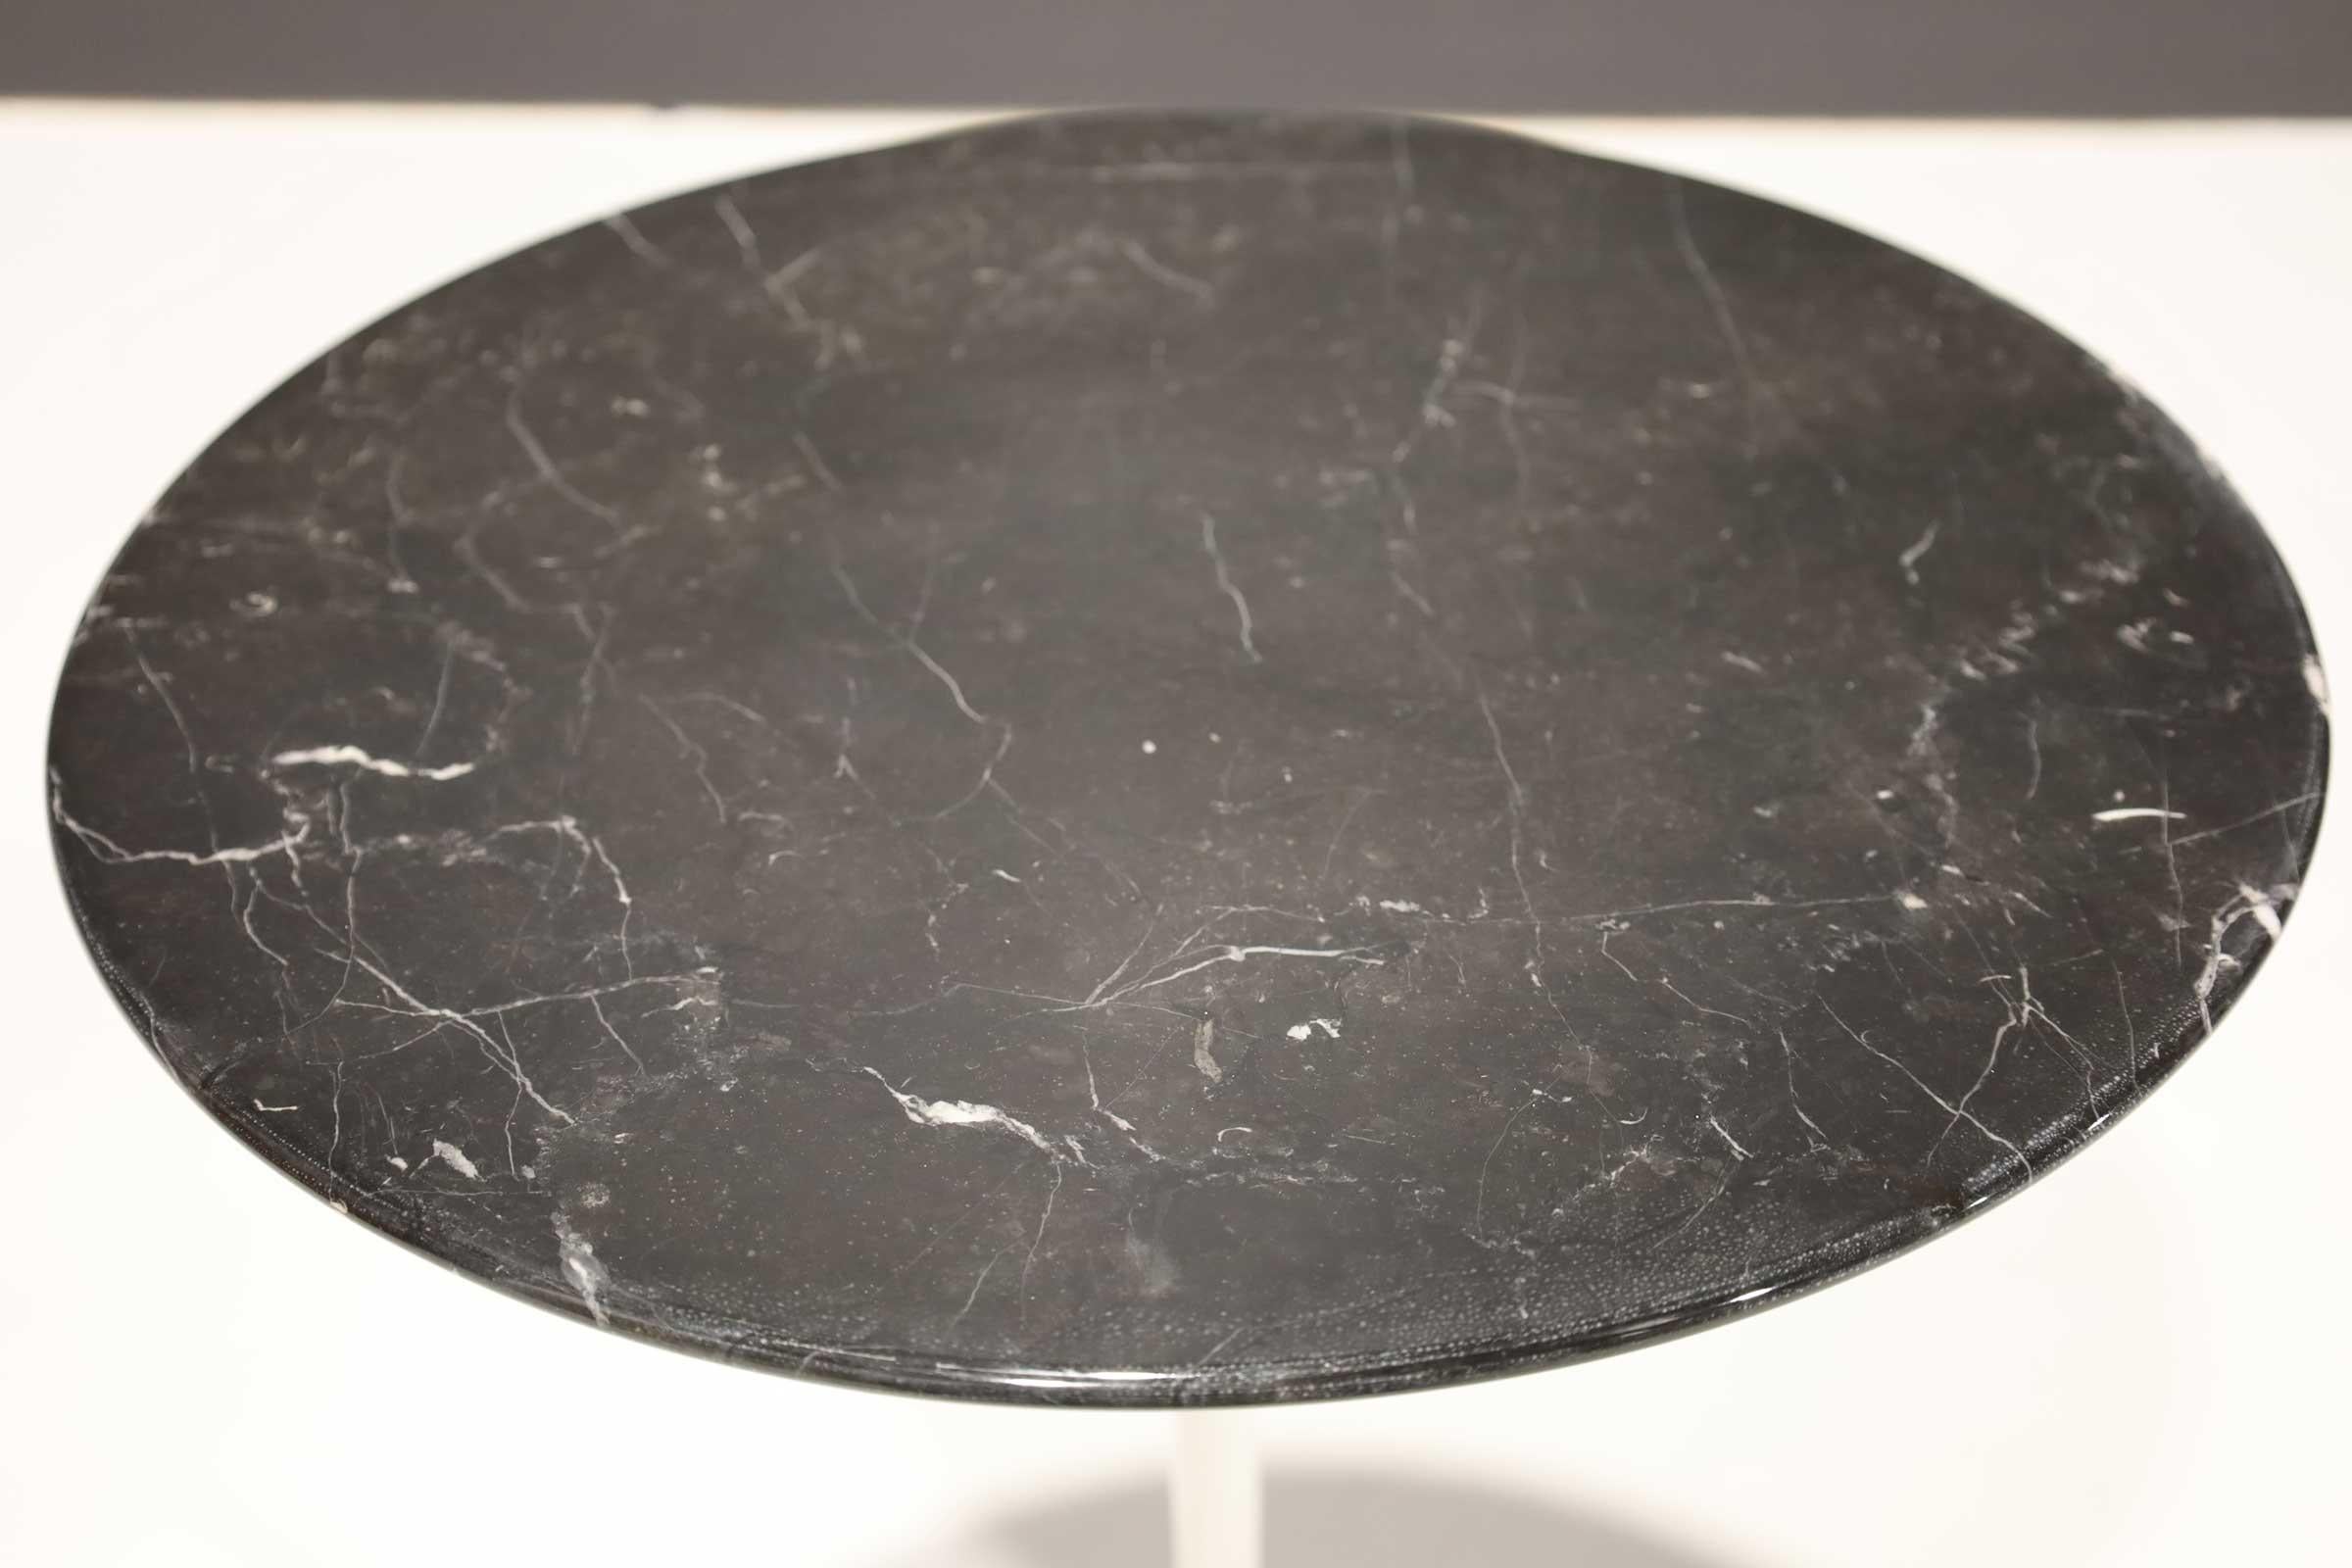 Classic Knoll tulip side table in Nero Maquina marble top with white base.